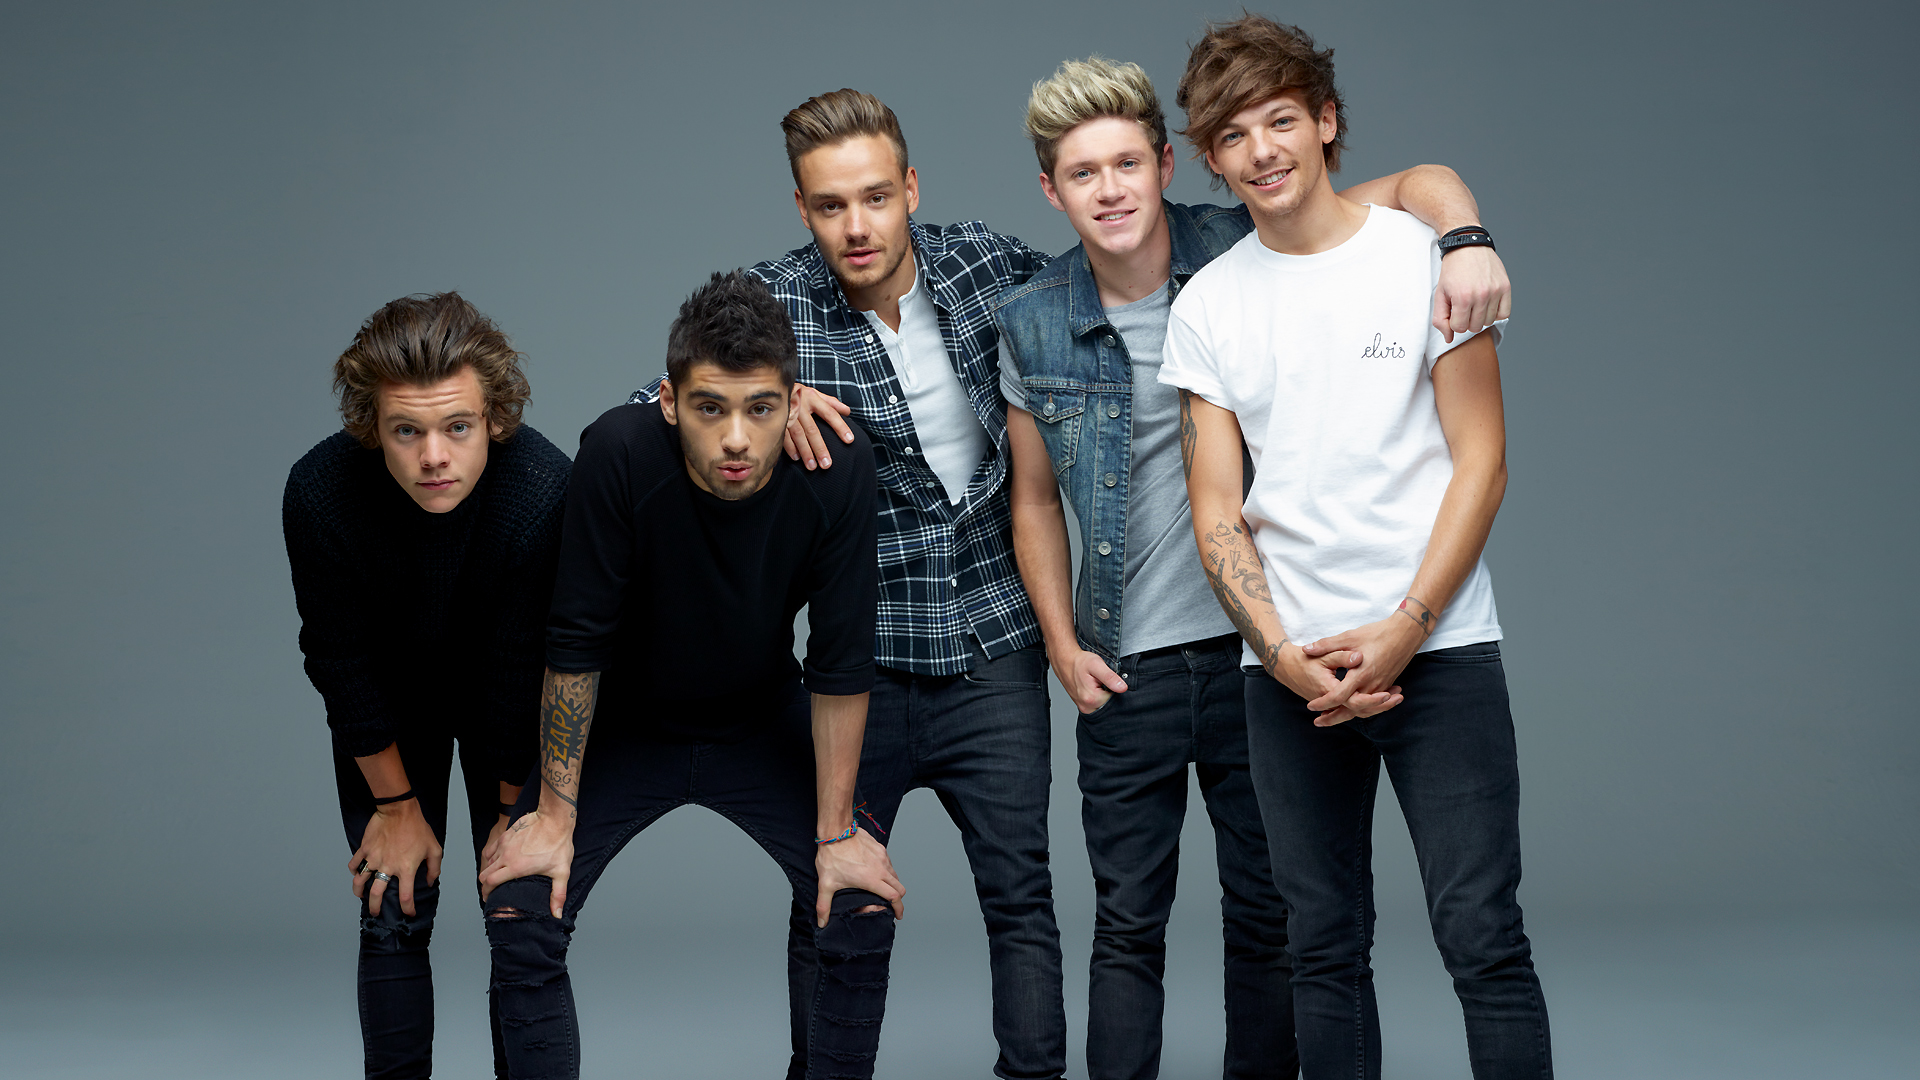 Wonderful One Direction Wallpaper Full HD Pictures 1920x1080